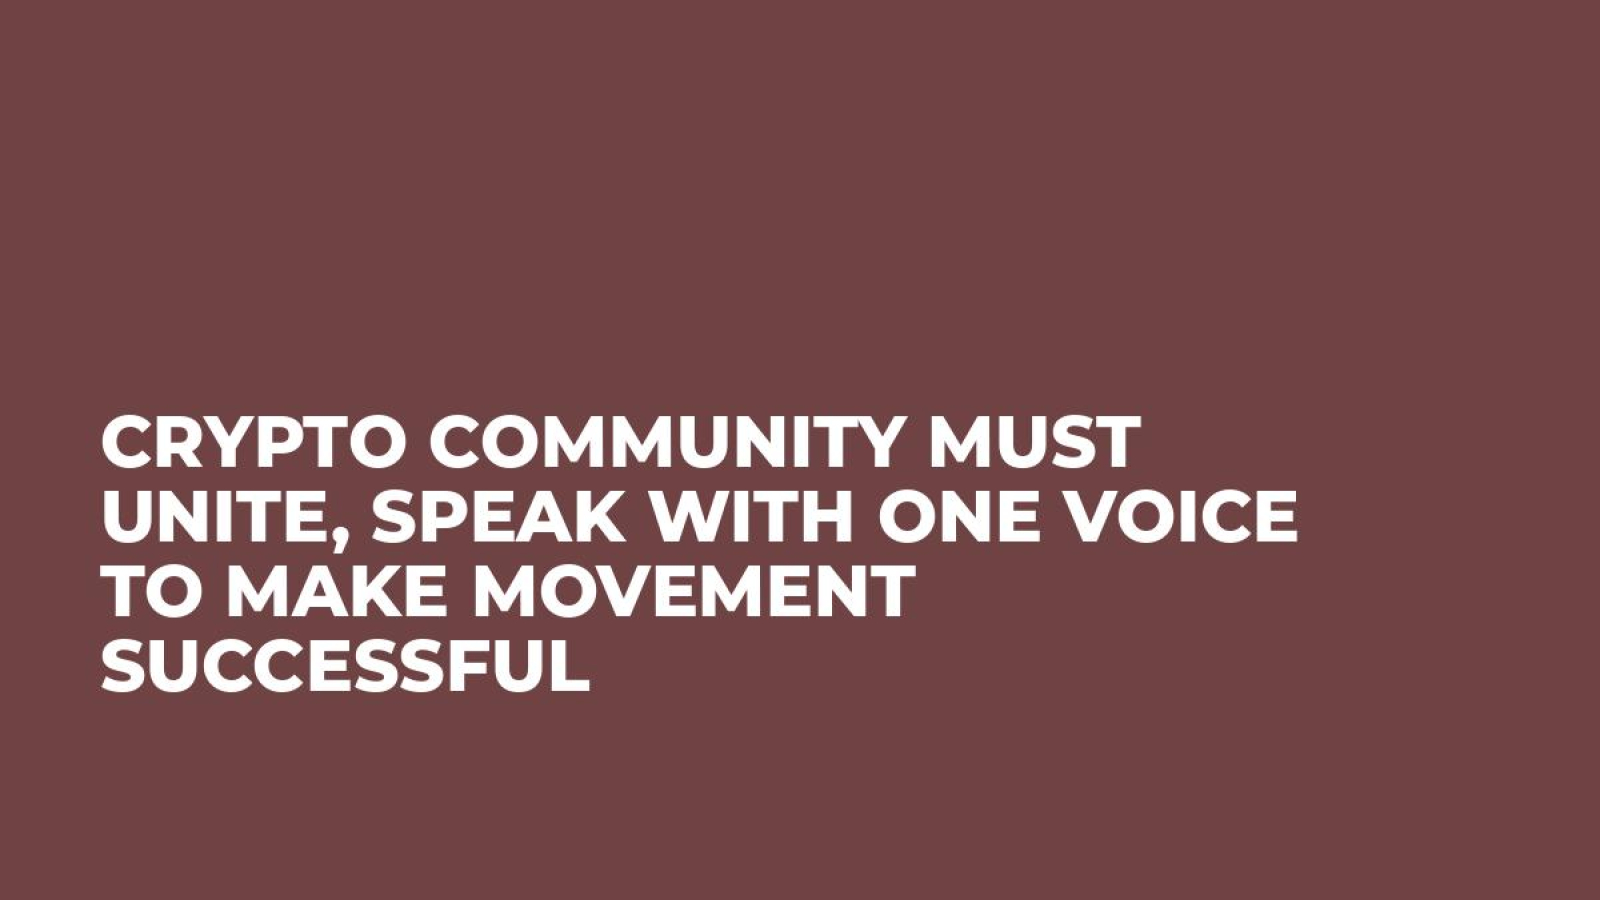 Crypto Community Must Unite, Speak With One Voice to Make Movement Successful